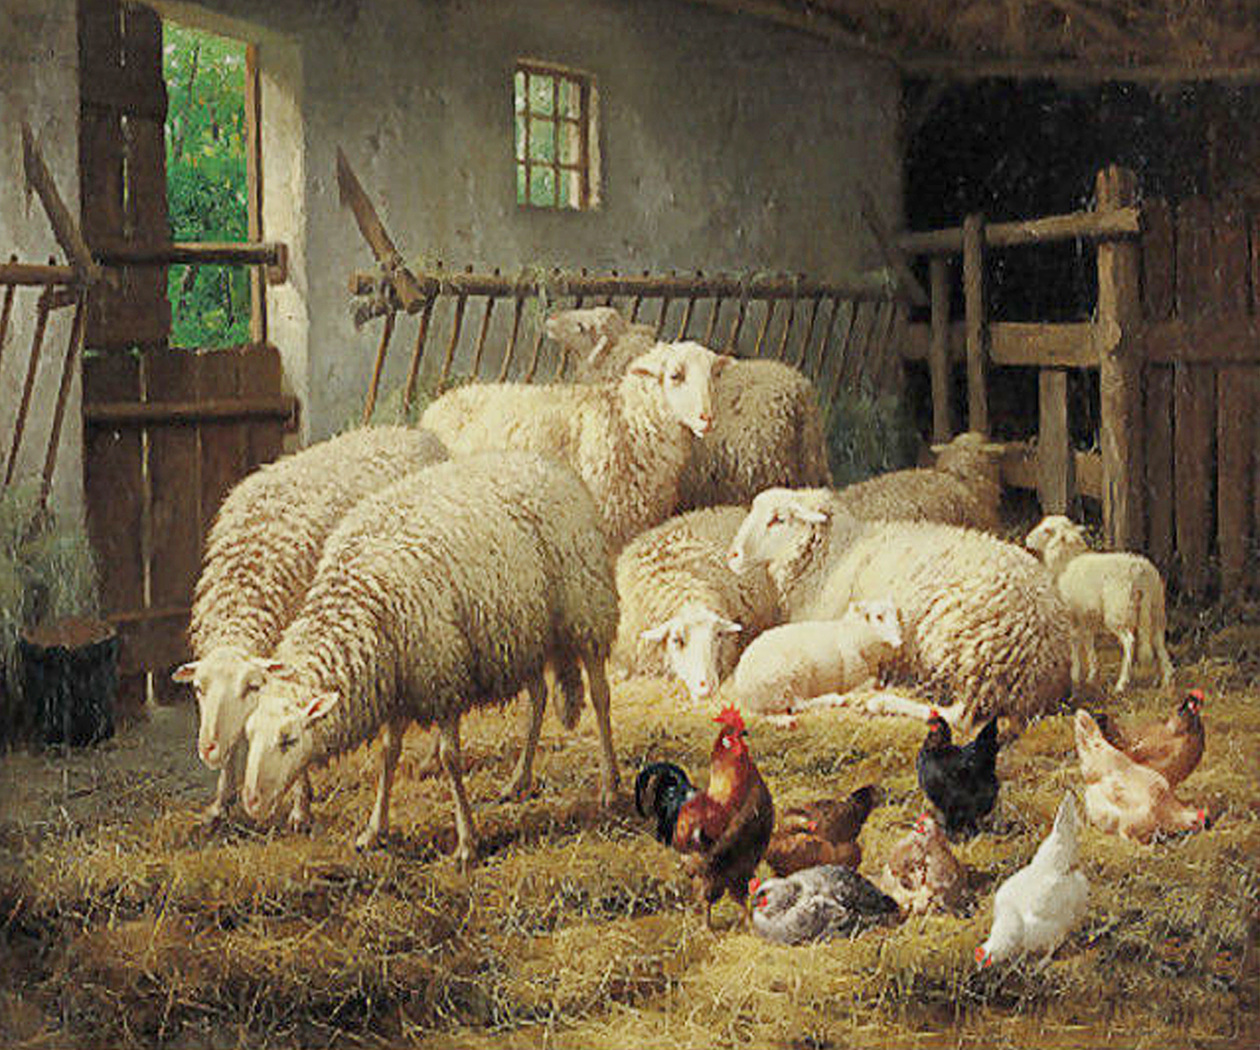 Farm/Pastoral Farm Sheep and Chickens Framed Oil Painting Print on Canvas